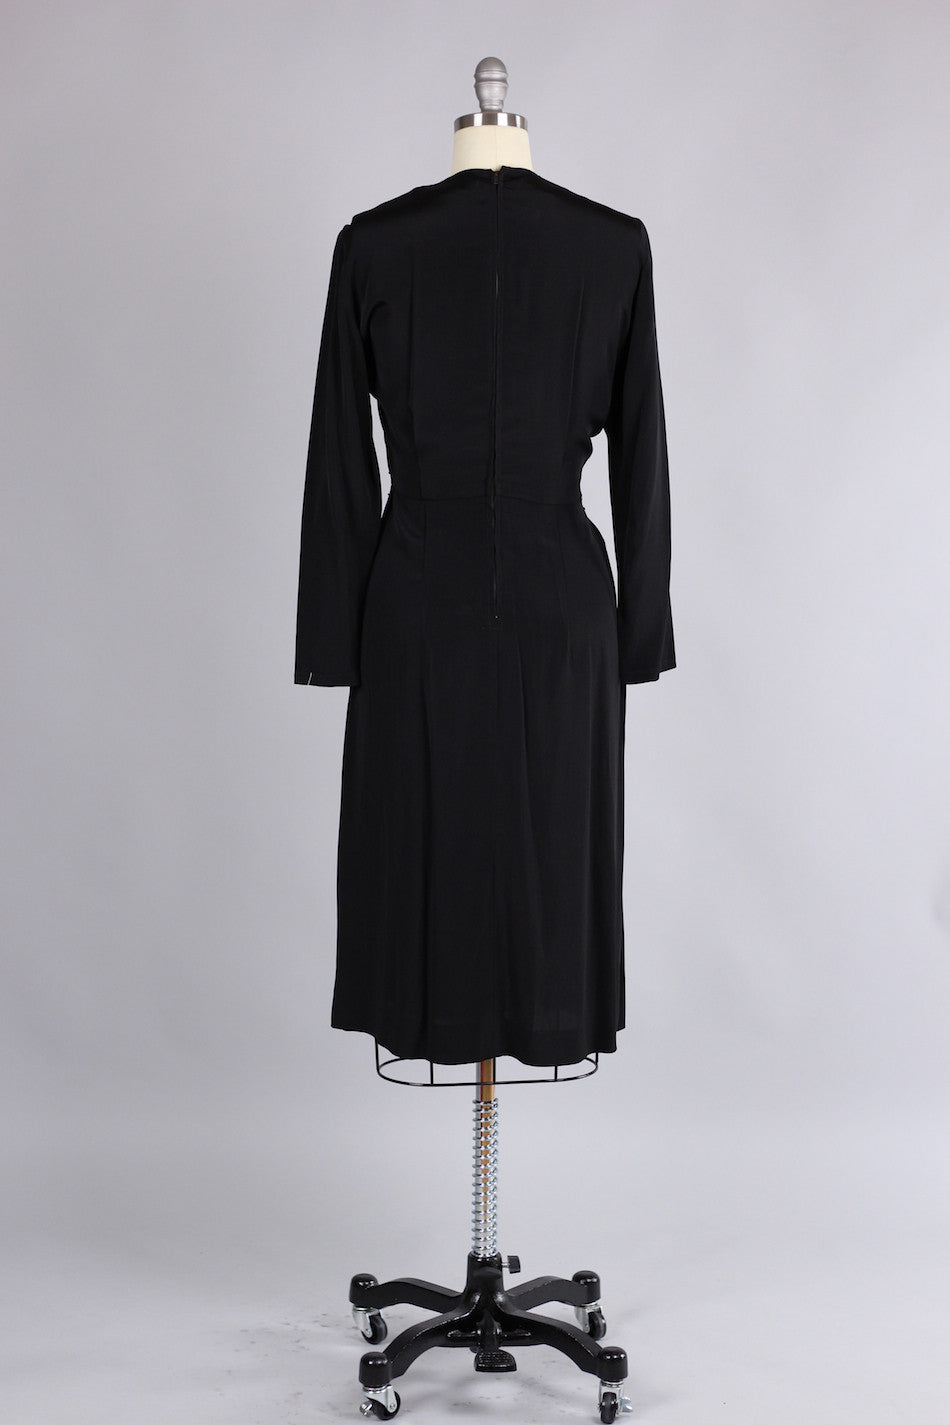 Early 1940s Black Rayon & Sequin Cocktail Dress